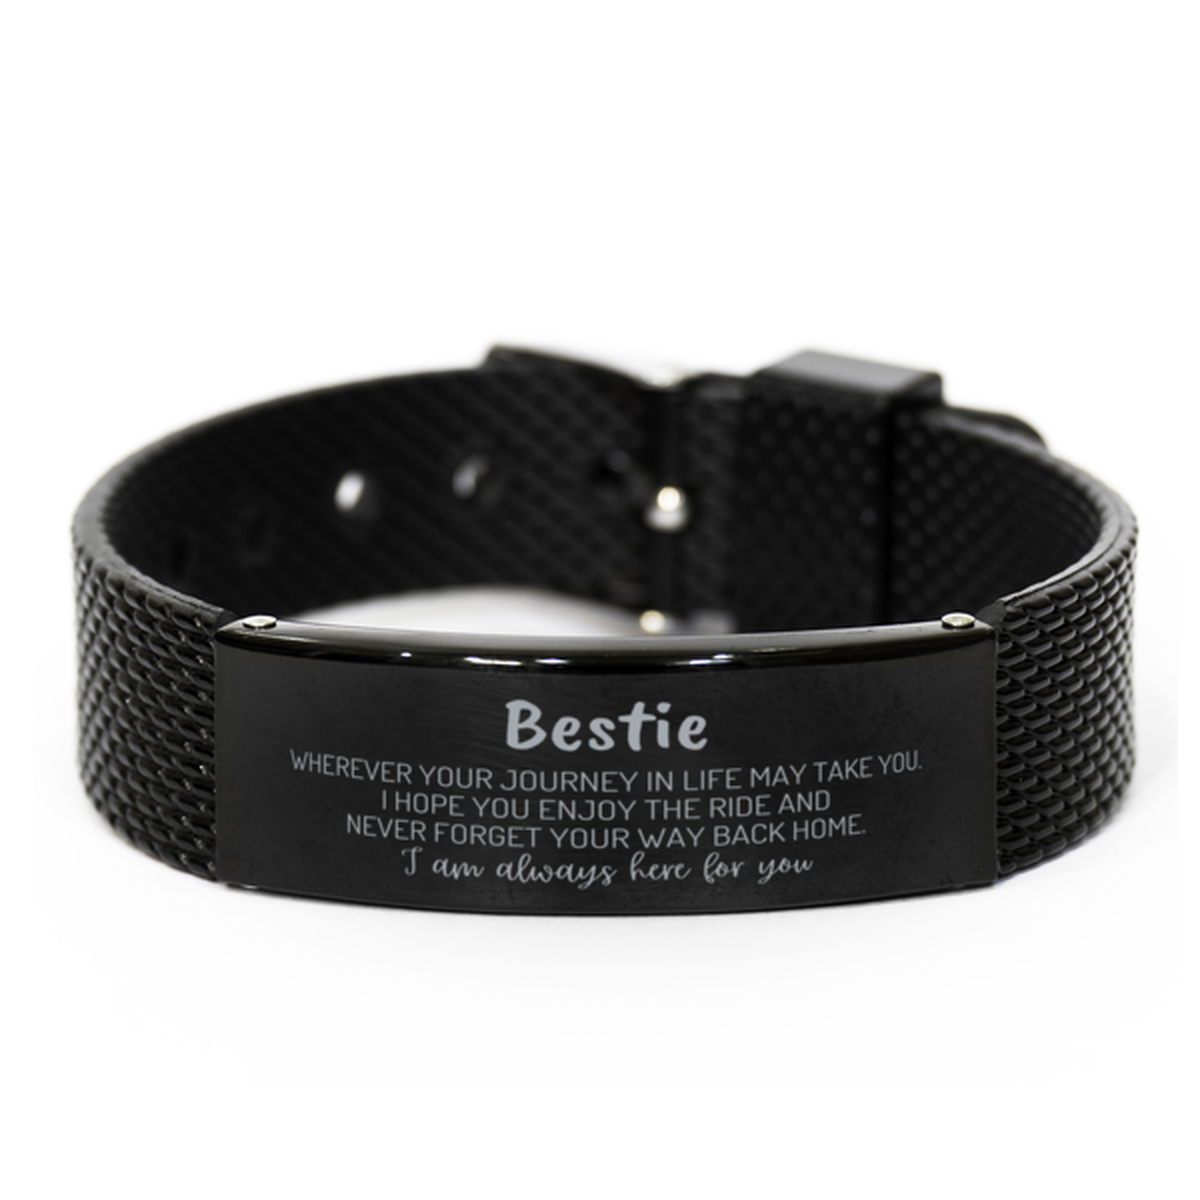 Bestie wherever your journey in life may take you, I am always here for you Bestie Black Shark Mesh Bracelet, Awesome Christmas Gifts For Bestie, Bestie Birthday Gifts for Men Women Family Loved One